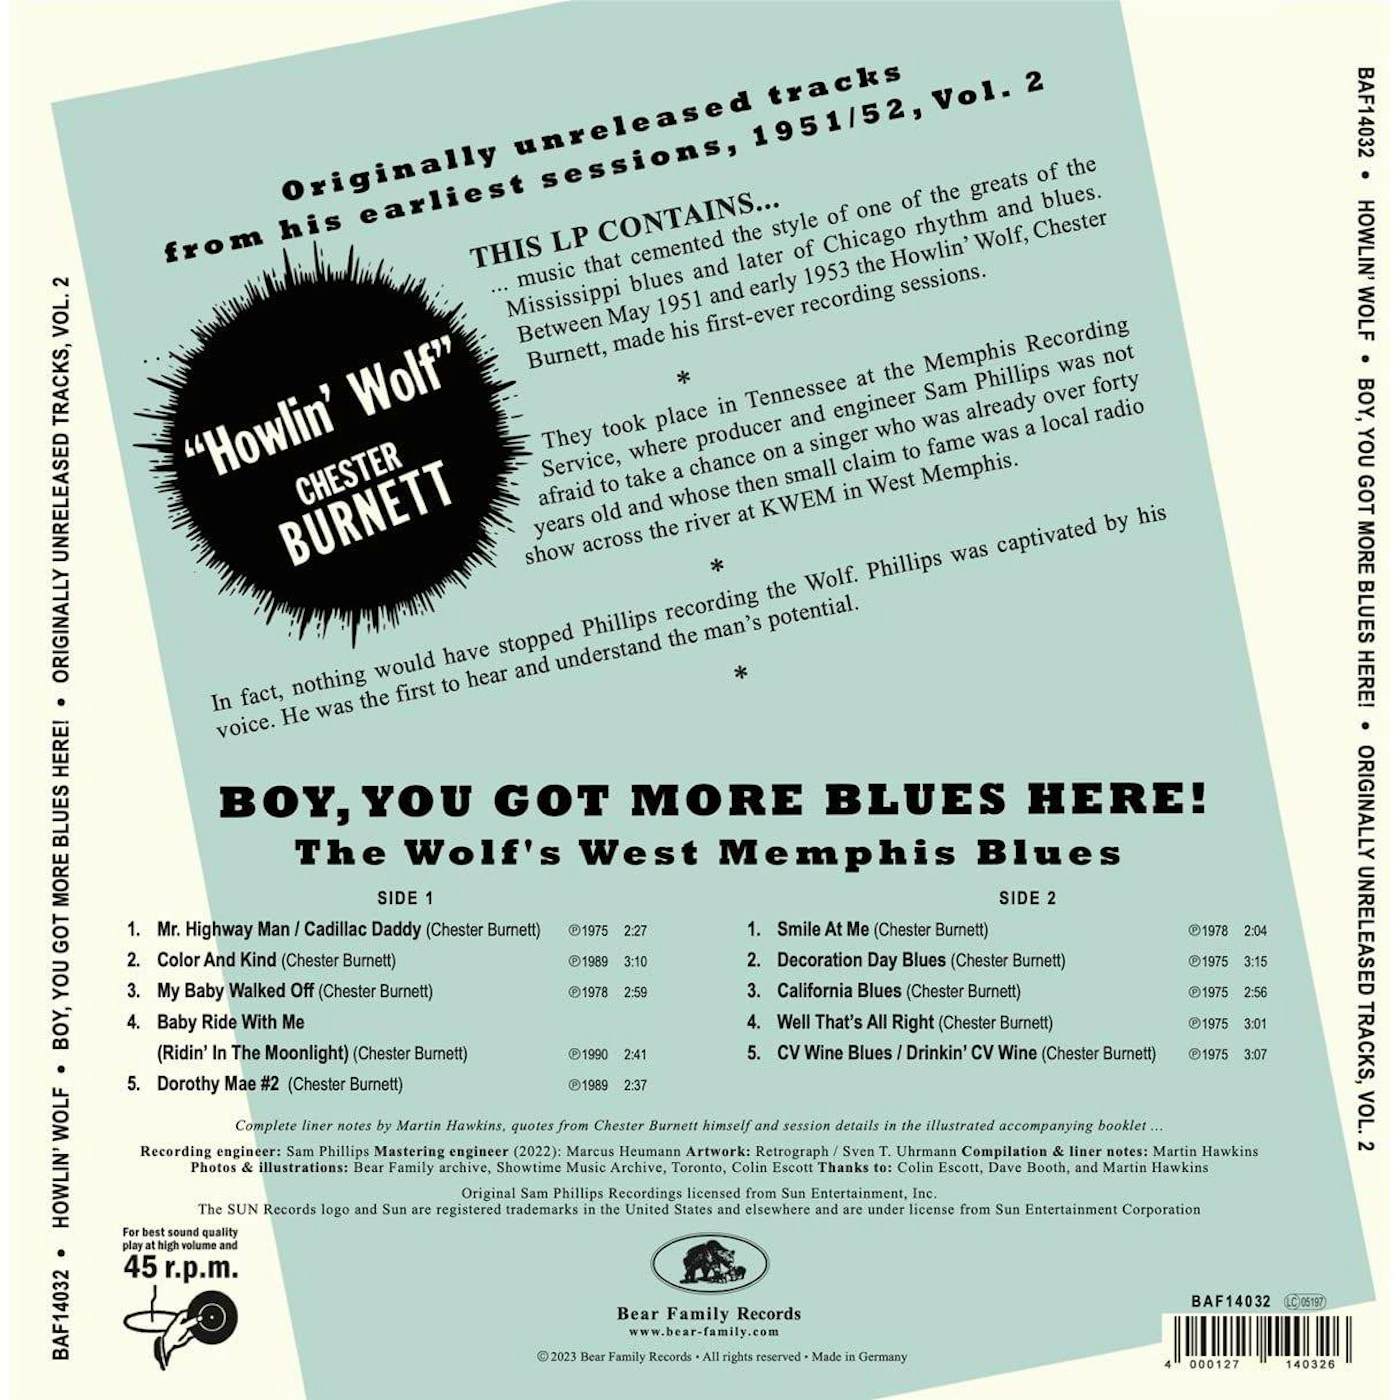 Howlin' Wolf Boy, You Got More Blues Here!: The Wolf's West Memphis Blues, Vol. 2 Vinyl Record